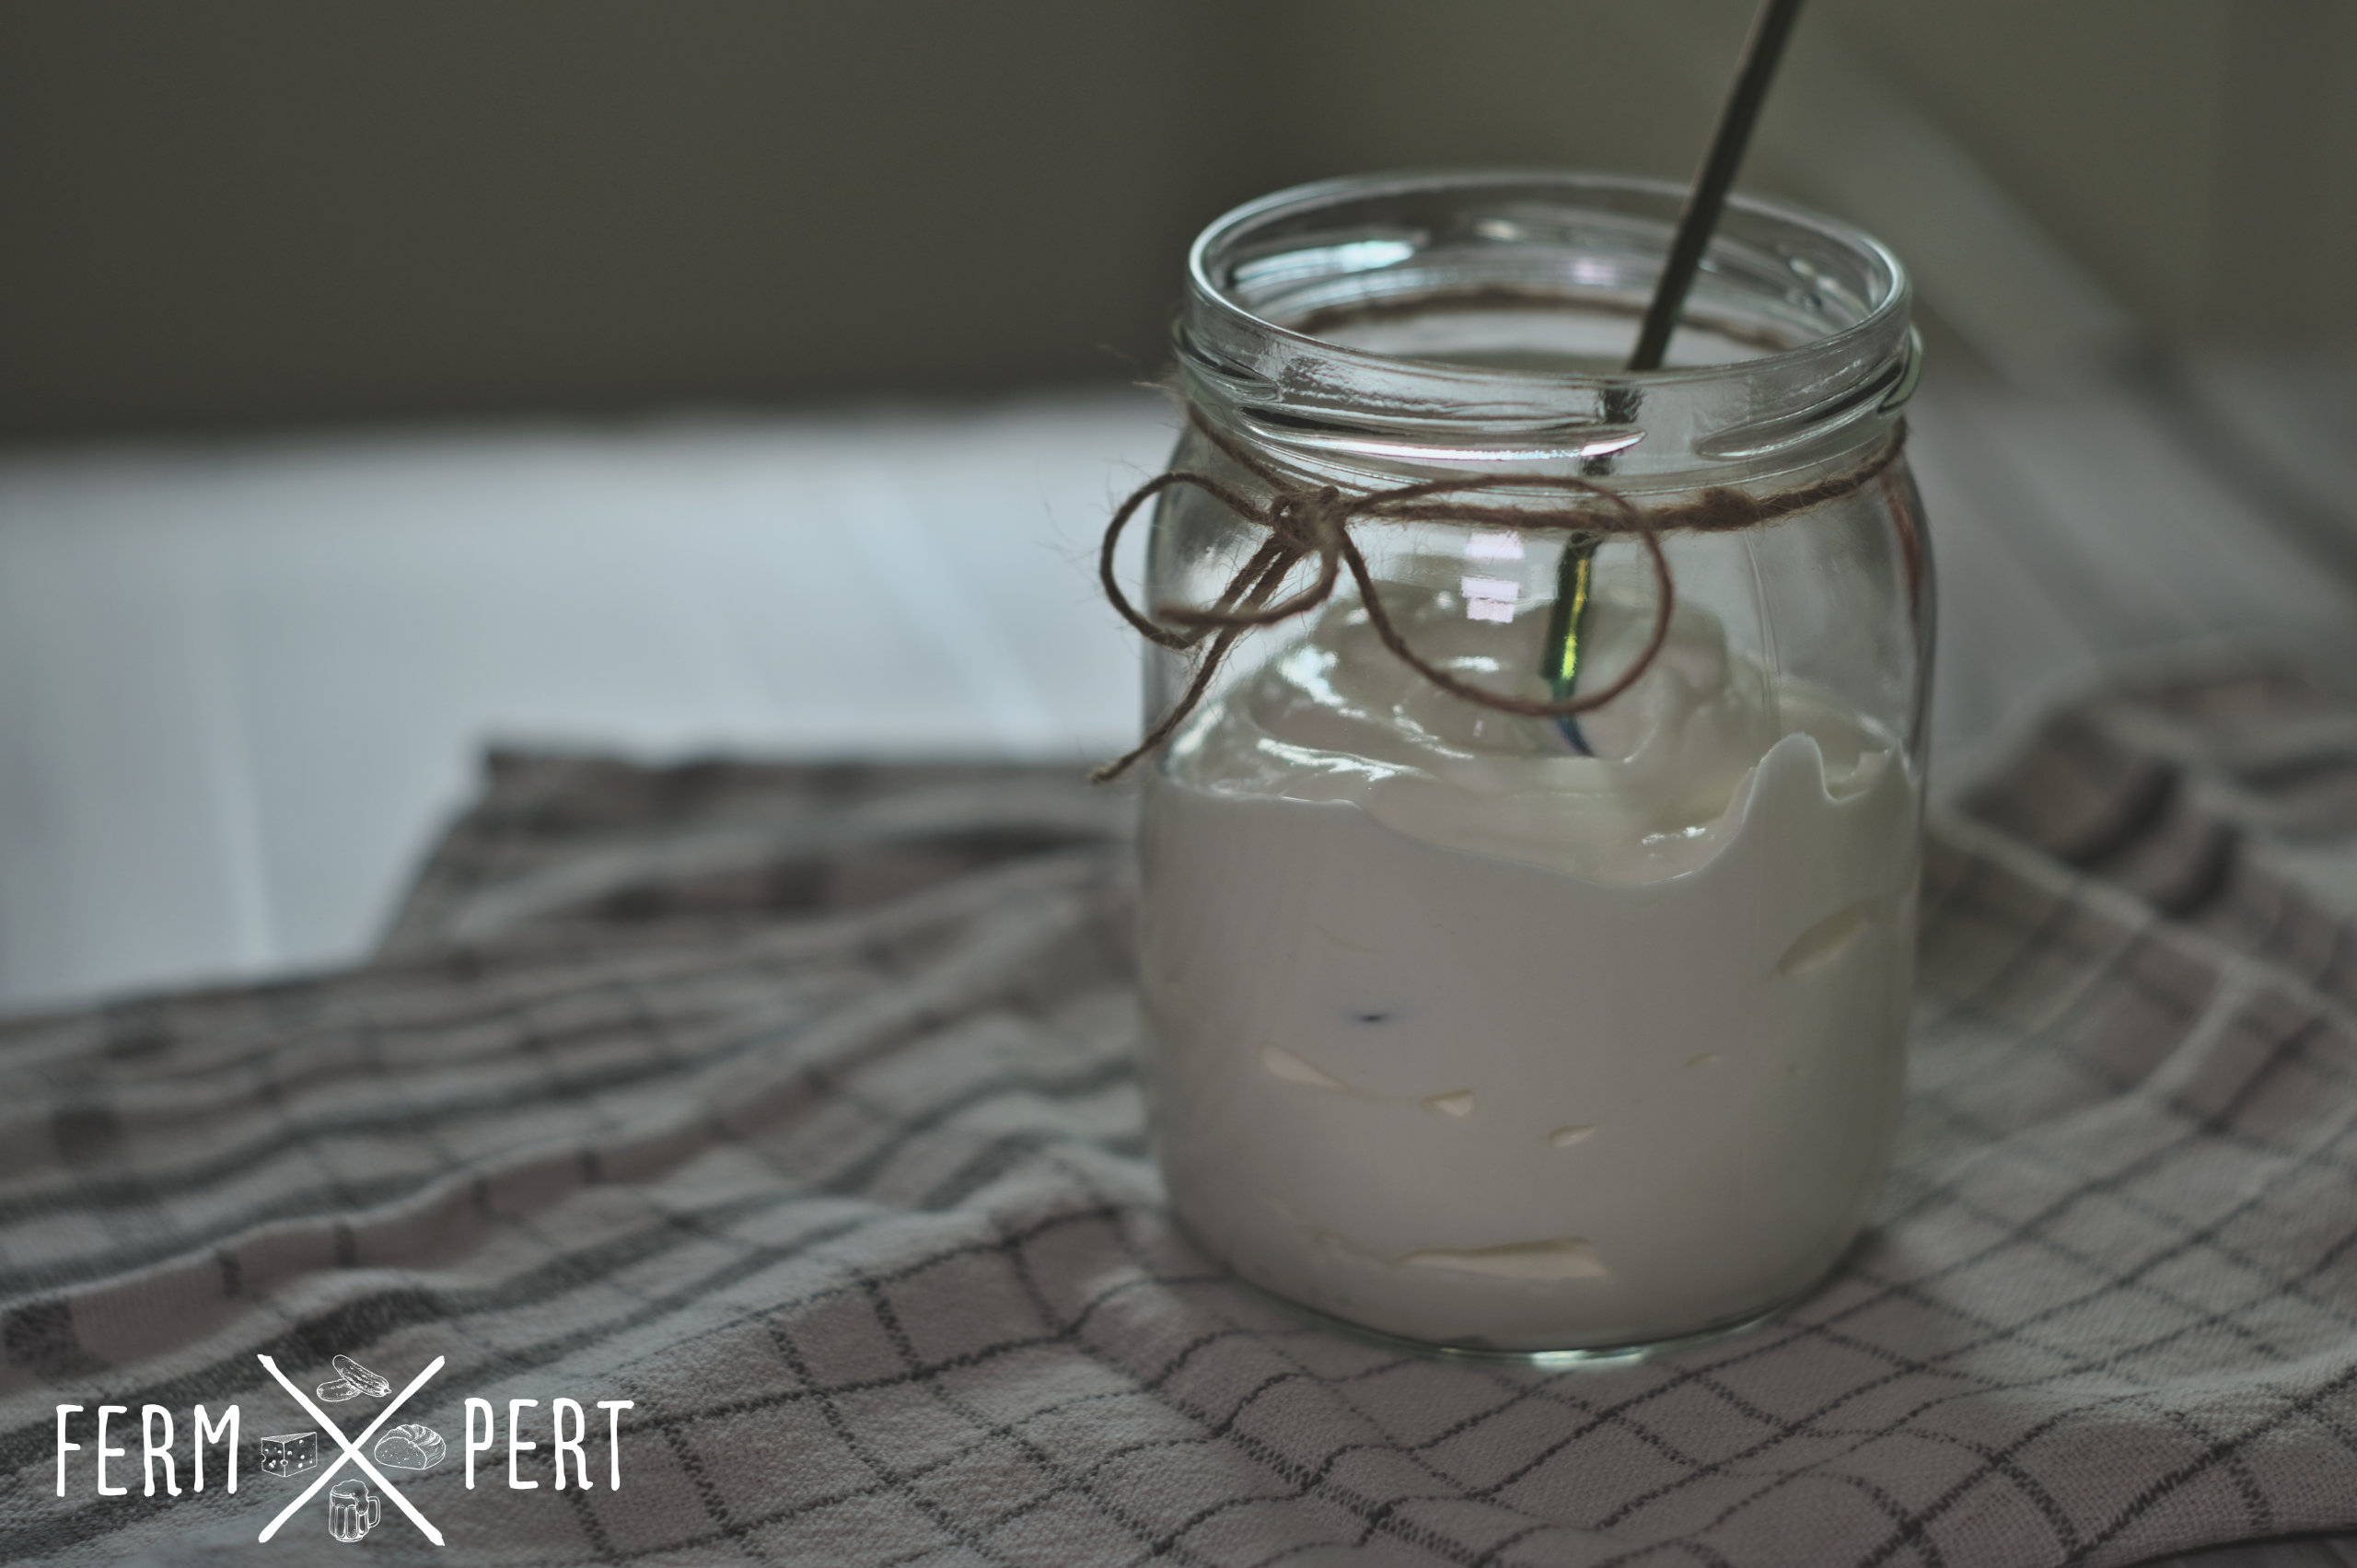 Photo of a jar of cream standing on a tea towel